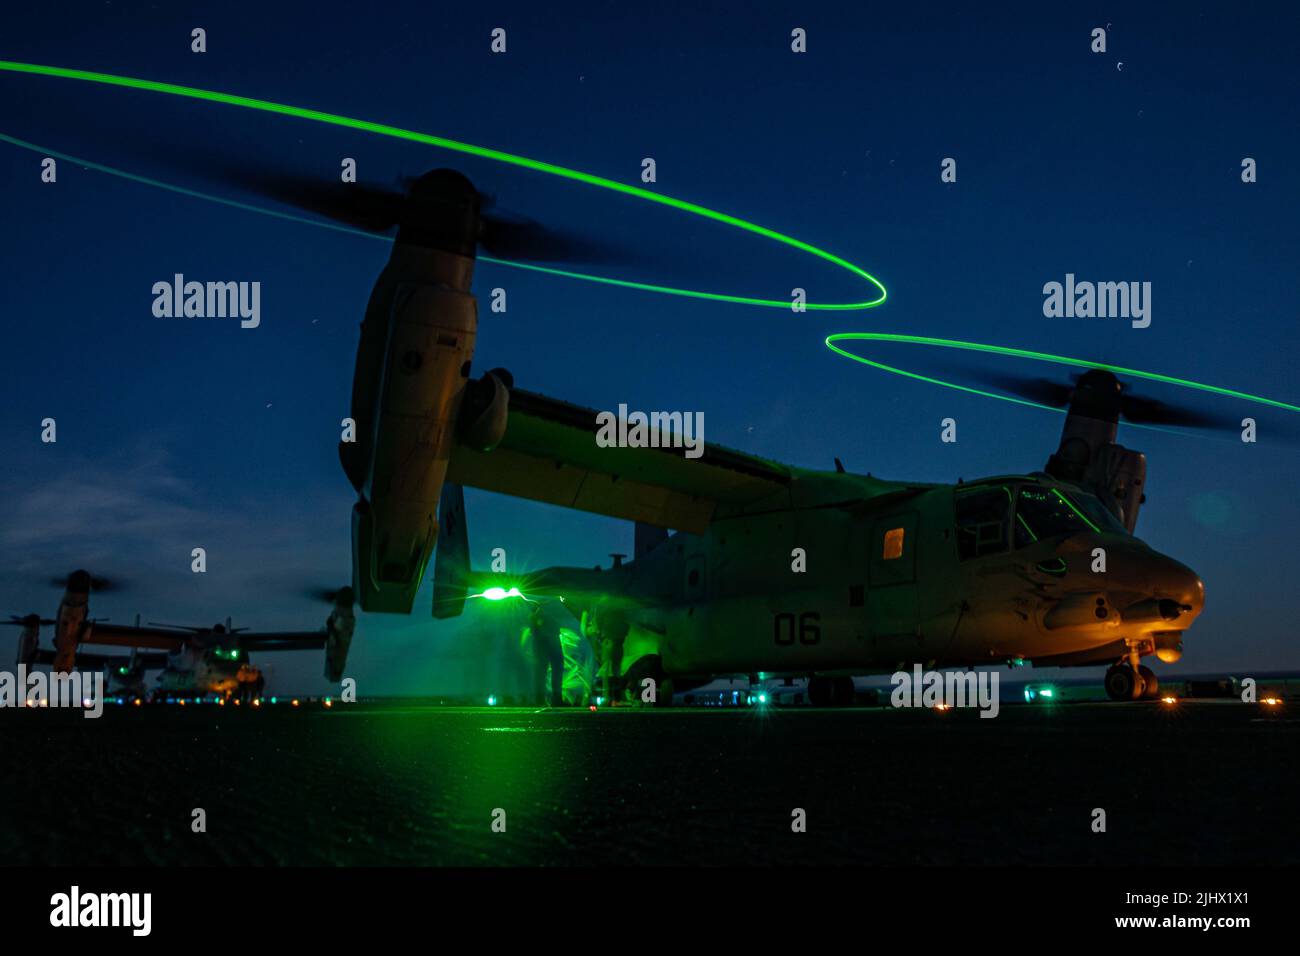 July 15, 2022 - At Sea - U.S. Marines assigned to the Aviation Combat Element, 22nd Marine Expeditionary Unit (MEU), conduct MV-22 Osprey night flight operations aboard the Wasp-class amphibious assault ship USS Kearsarge (LHD 3) in the Atlantic Ocean, July 11, 2022. The Kearsarge Amphibious Ready Group and 22nd MEU, under the command and control of Task Force 61/2, are on a scheduled deployment in the U.S. Naval Forces Europe area of operations, employed by U.S. Sixth Fleet to defend U.S., allied and partner interests. (U.S. Marine Corps photo by Sgt. Armando Elizalde) (Credit Image: © U.S. M Stock Photo